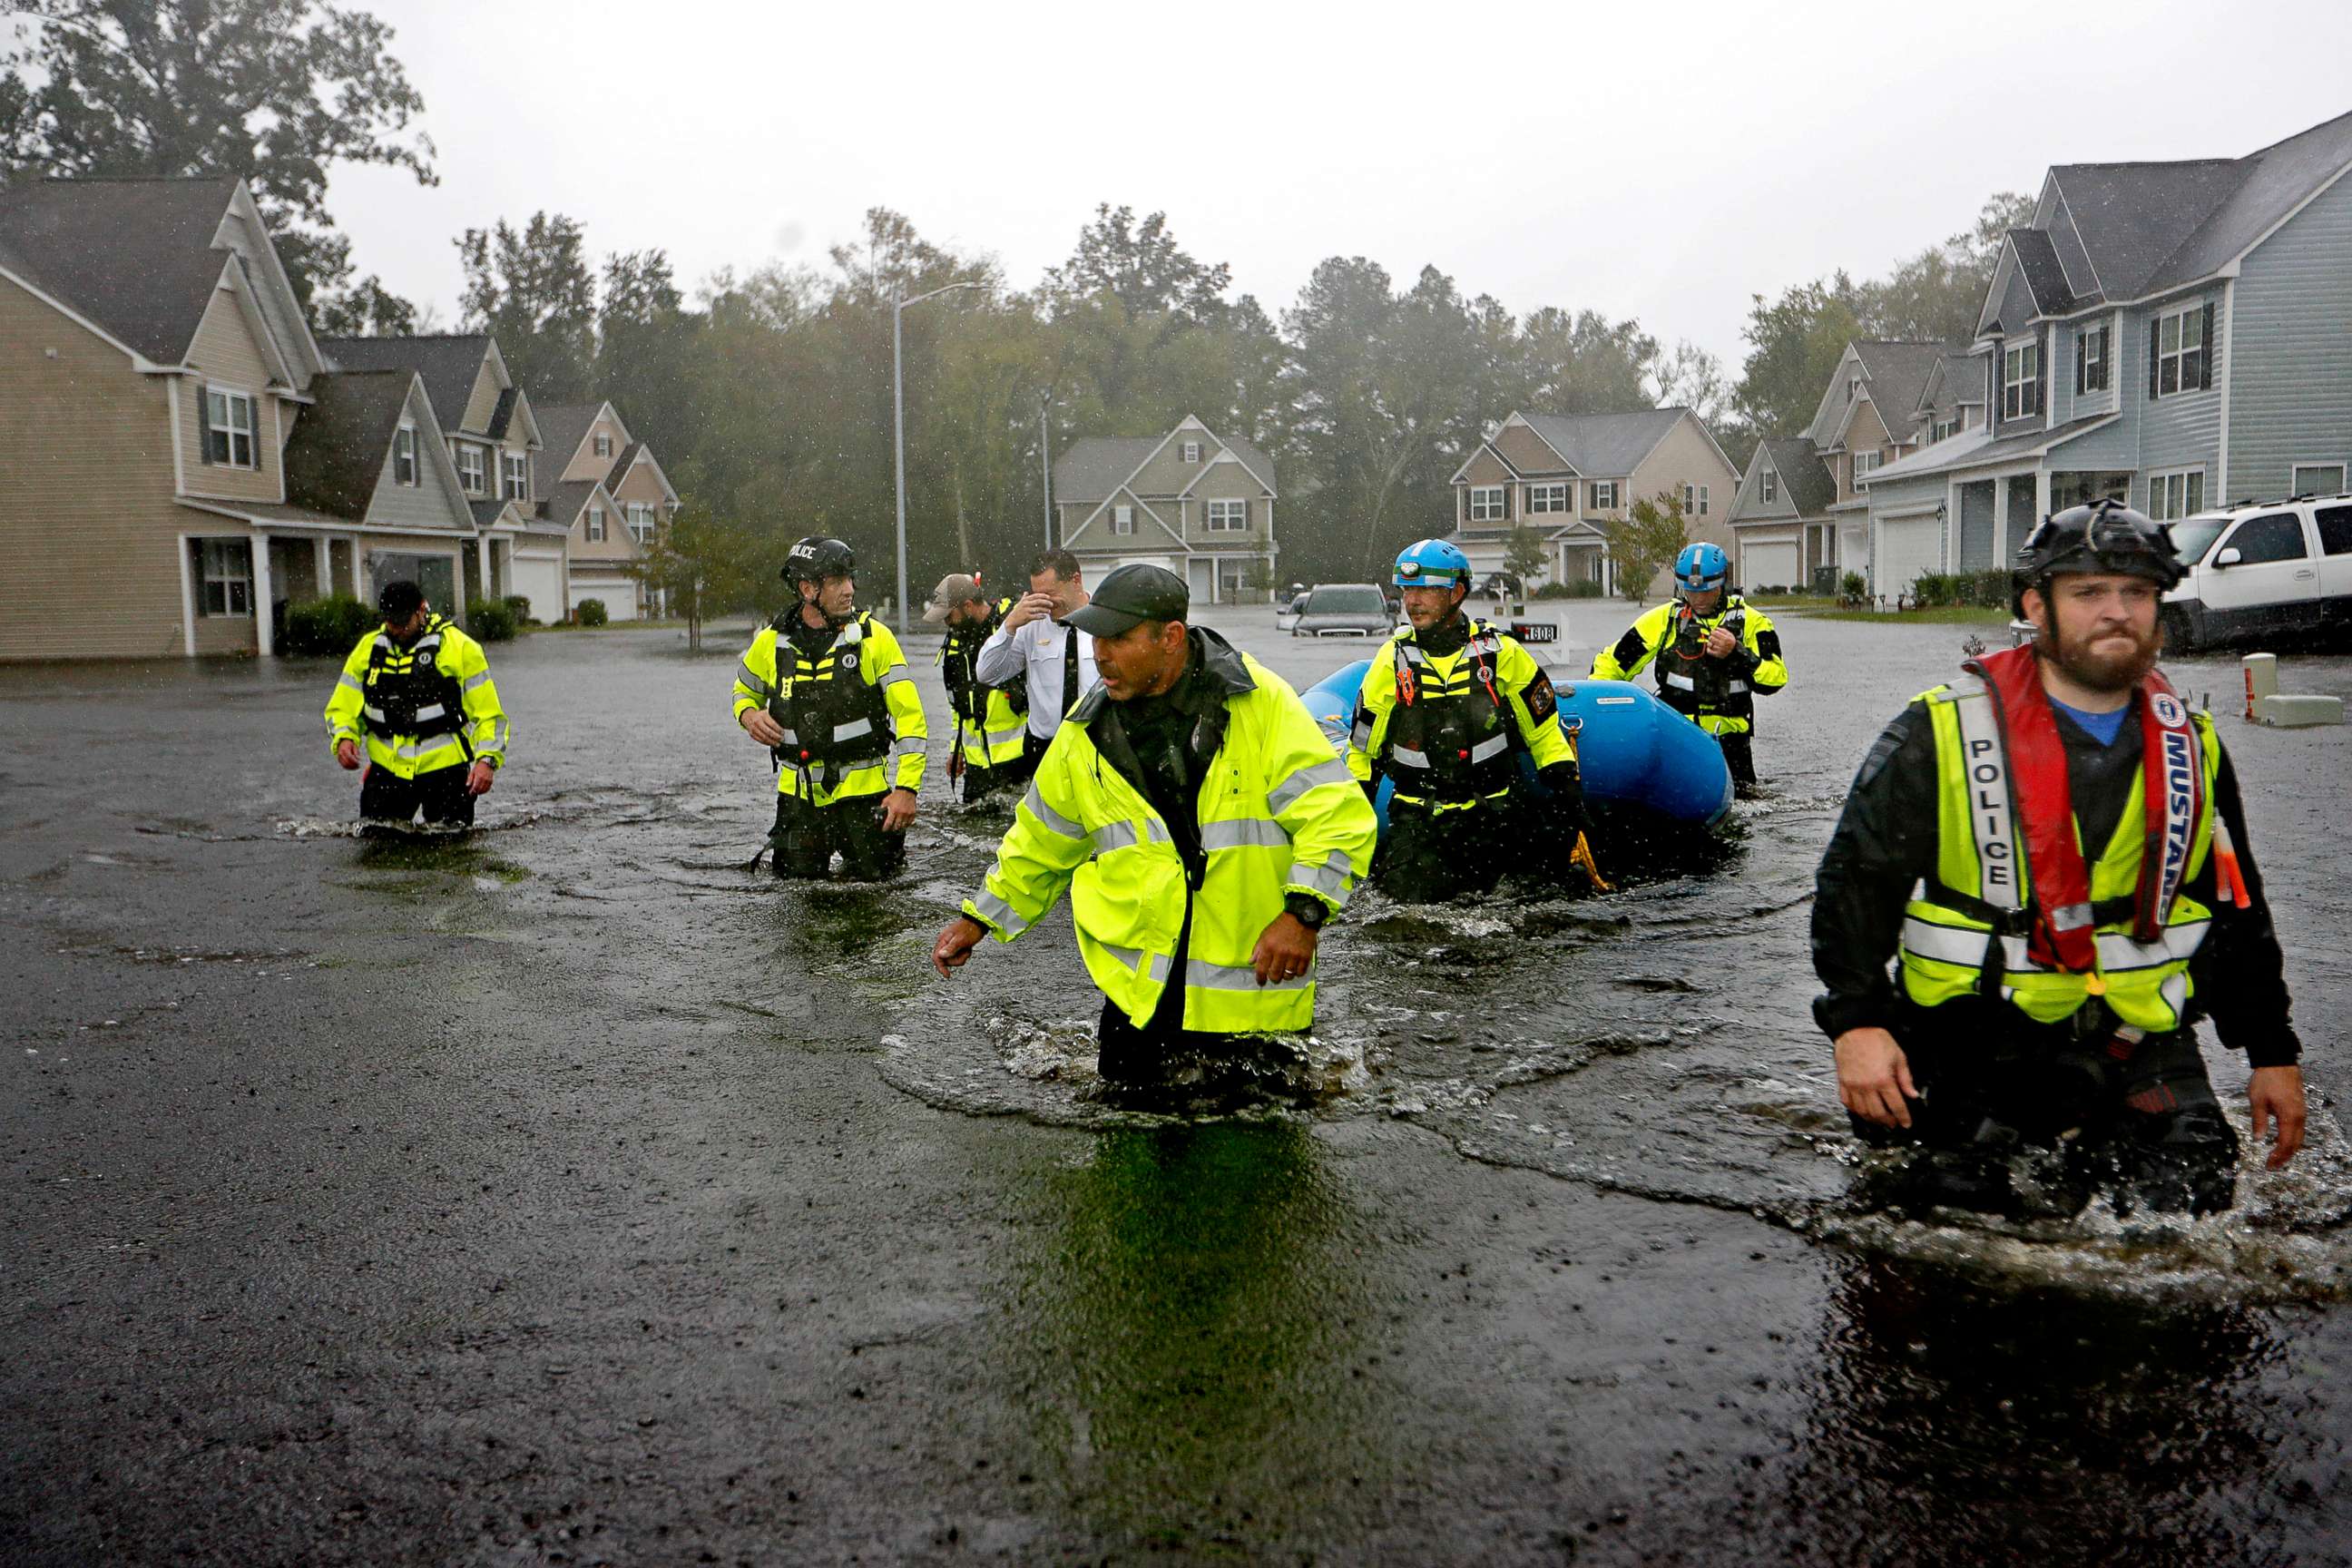 PHOTO: Members of the North Carolina Task Force urban search and rescue team wade through a flooded neighborhood looking for residents who stayed behind as Hurricane Florence continues to dump heavy rain in Fayetteville, N.C., Sept. 16, 2018.